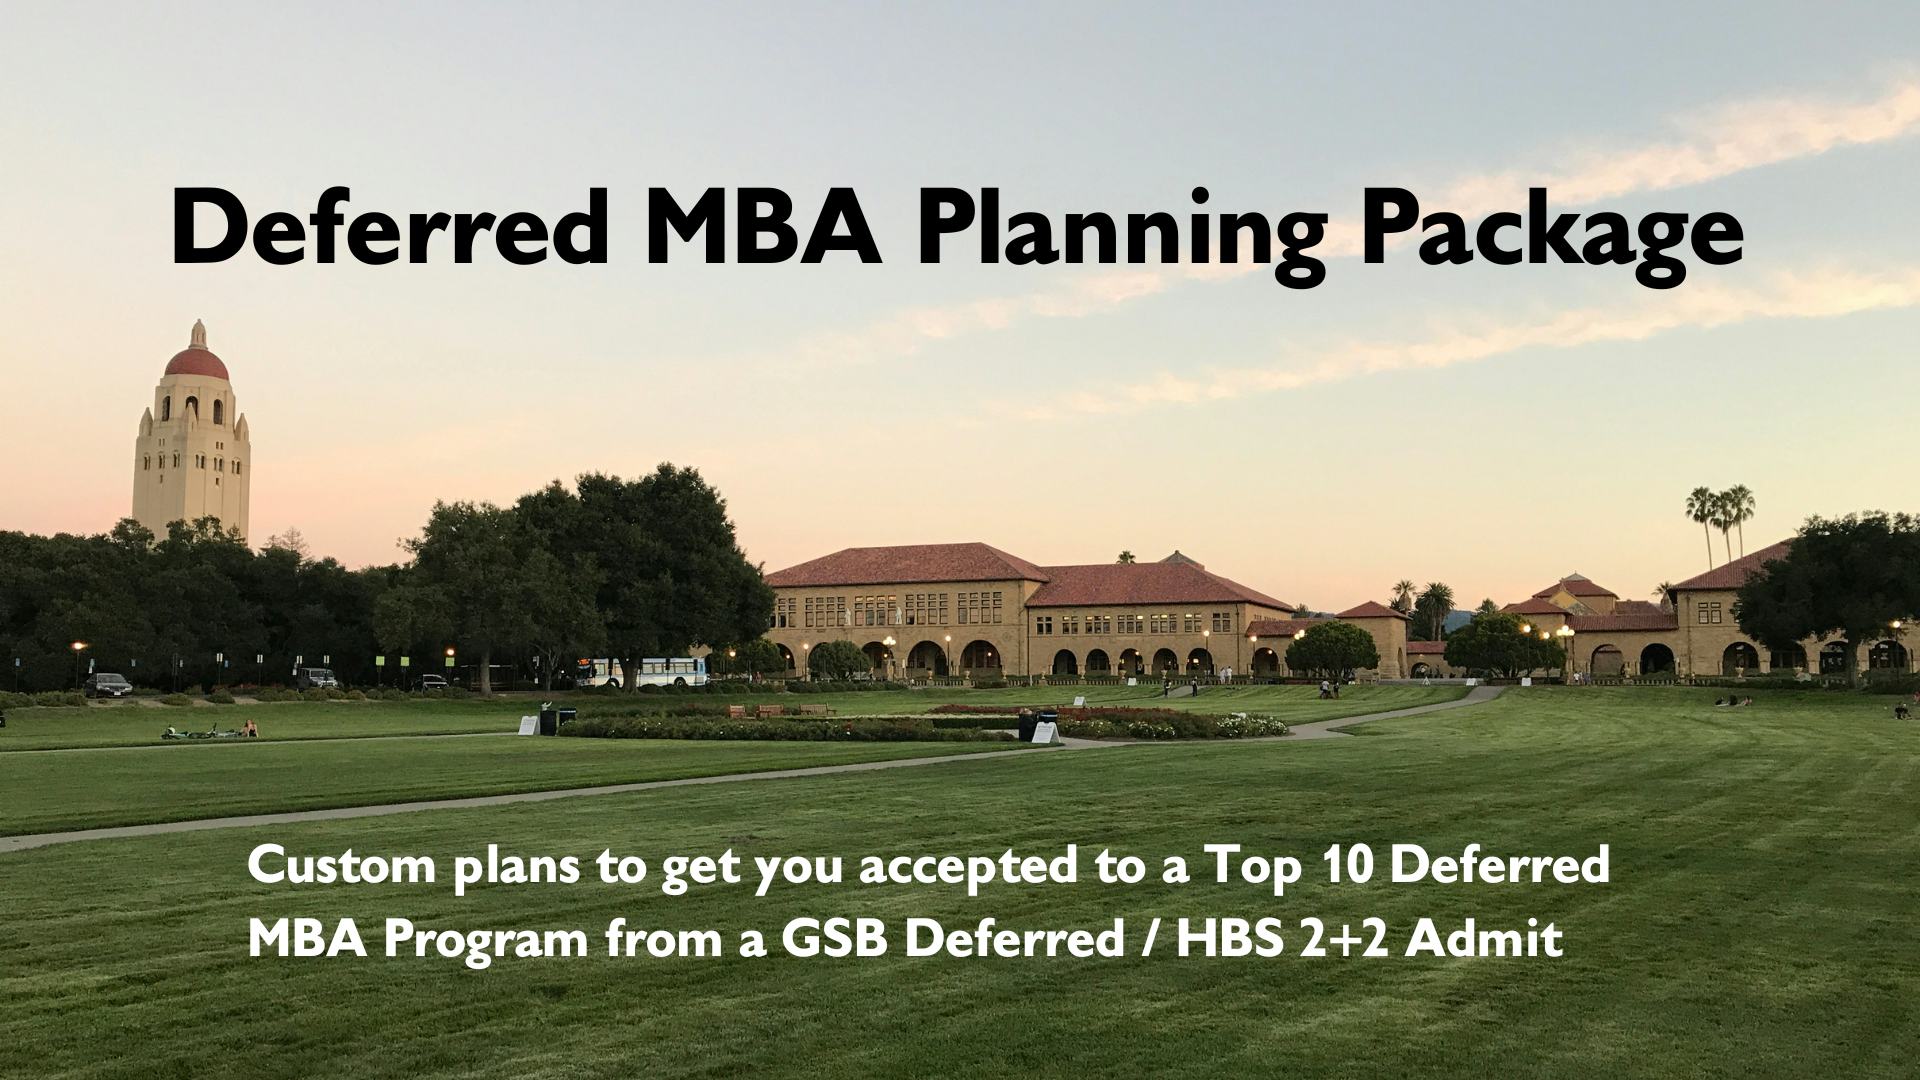 Deferred Planning Package